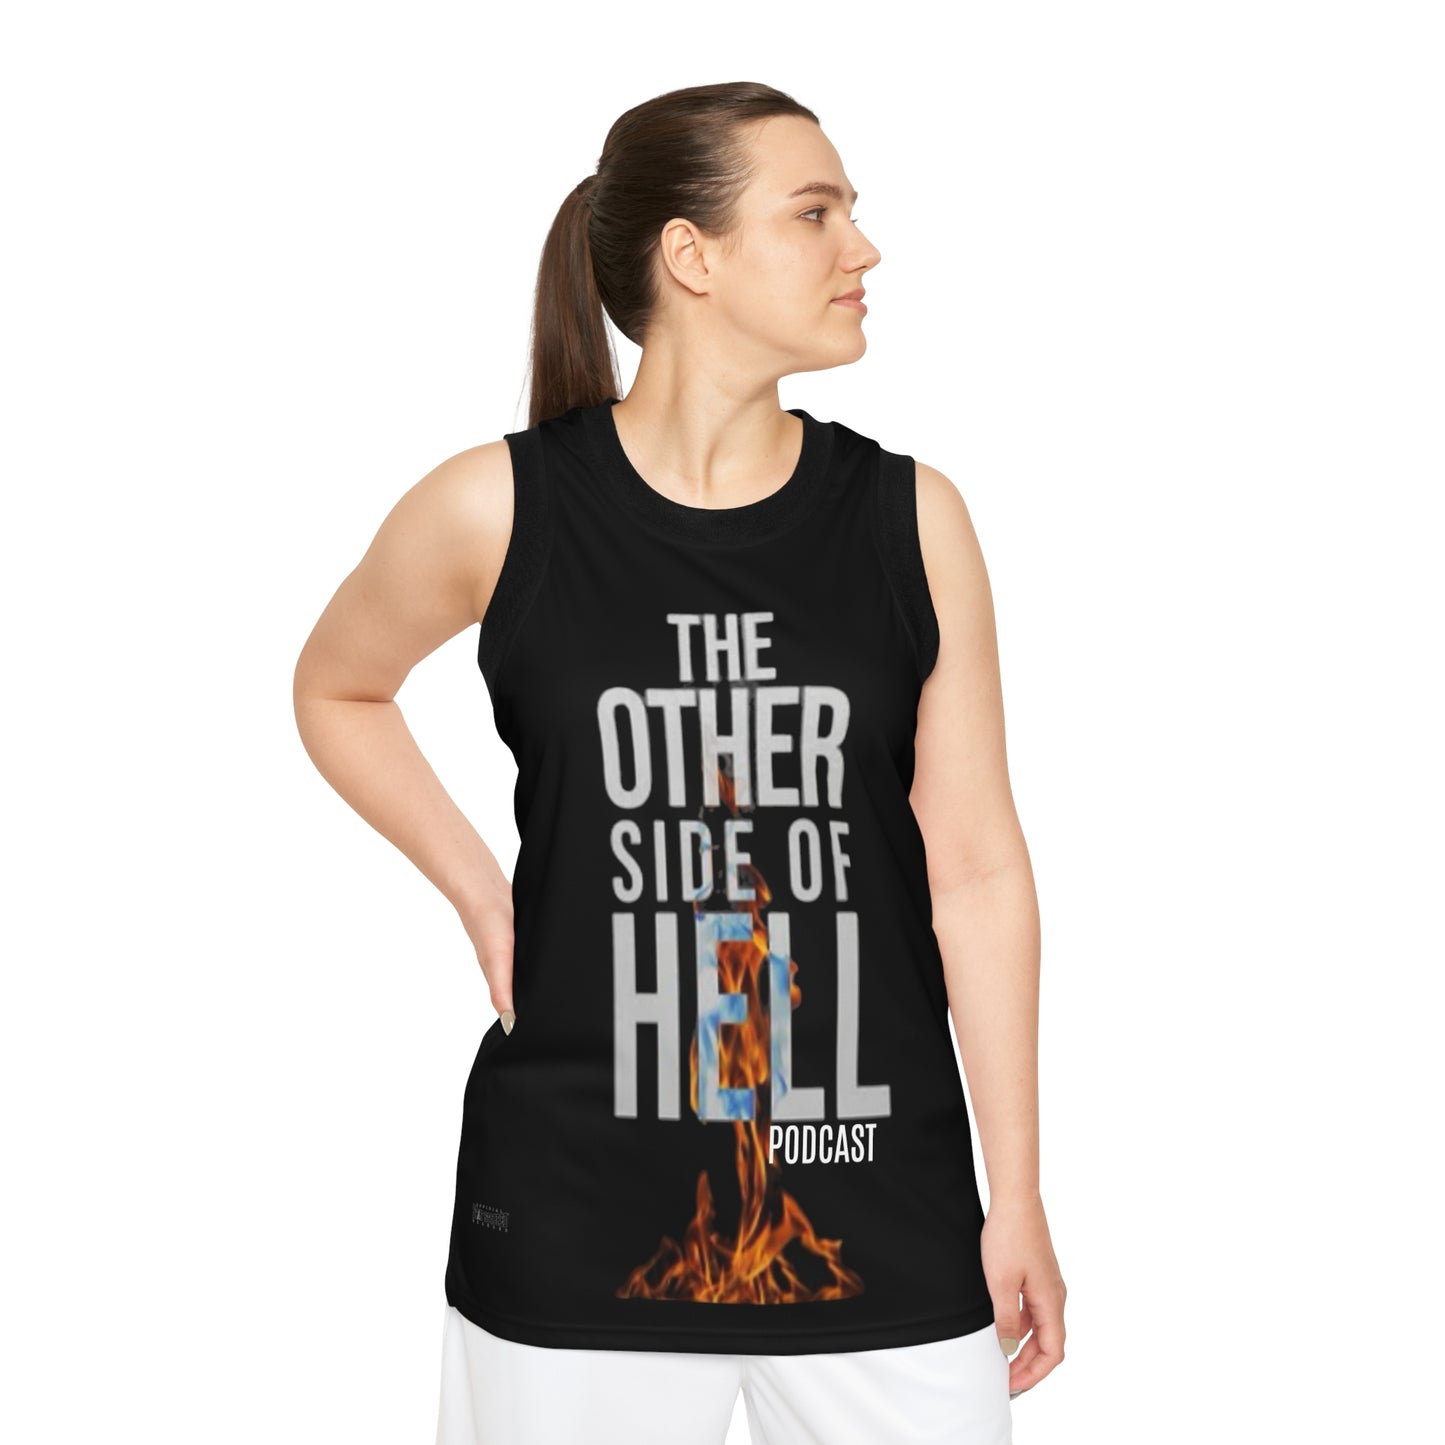 The Other Side of Hell Podcast Unisex Basketball Jersey (AOP)